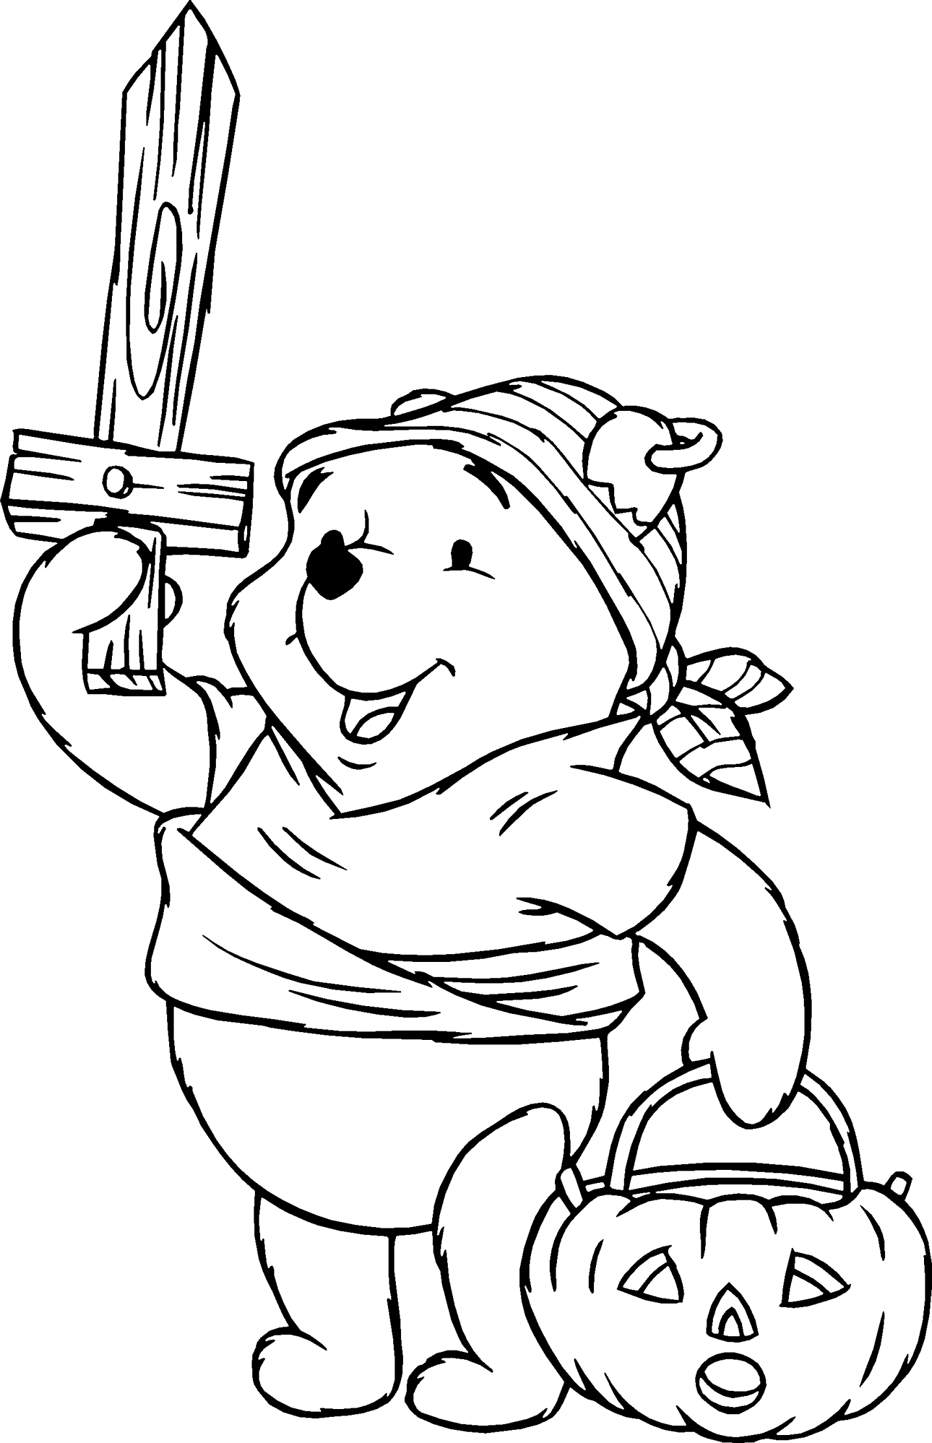 ???? Coloring Pages 3